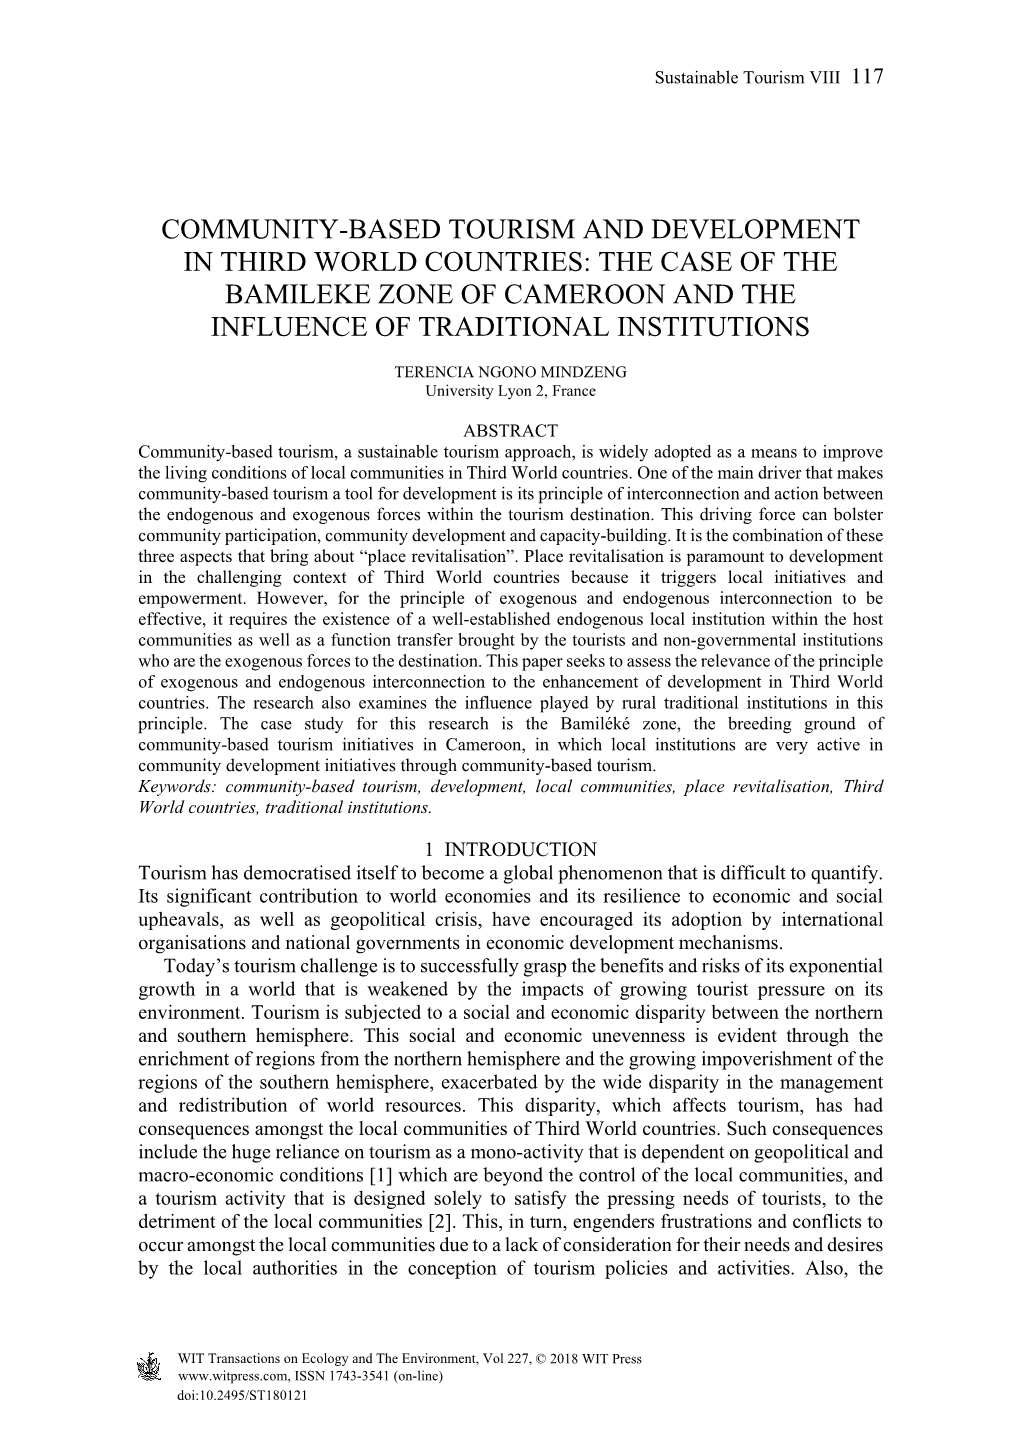 Community-Based Tourism and Development in Third World Countries: the Case of the Bamileke Zone of Cameroon and the Influence of Traditional Institutions